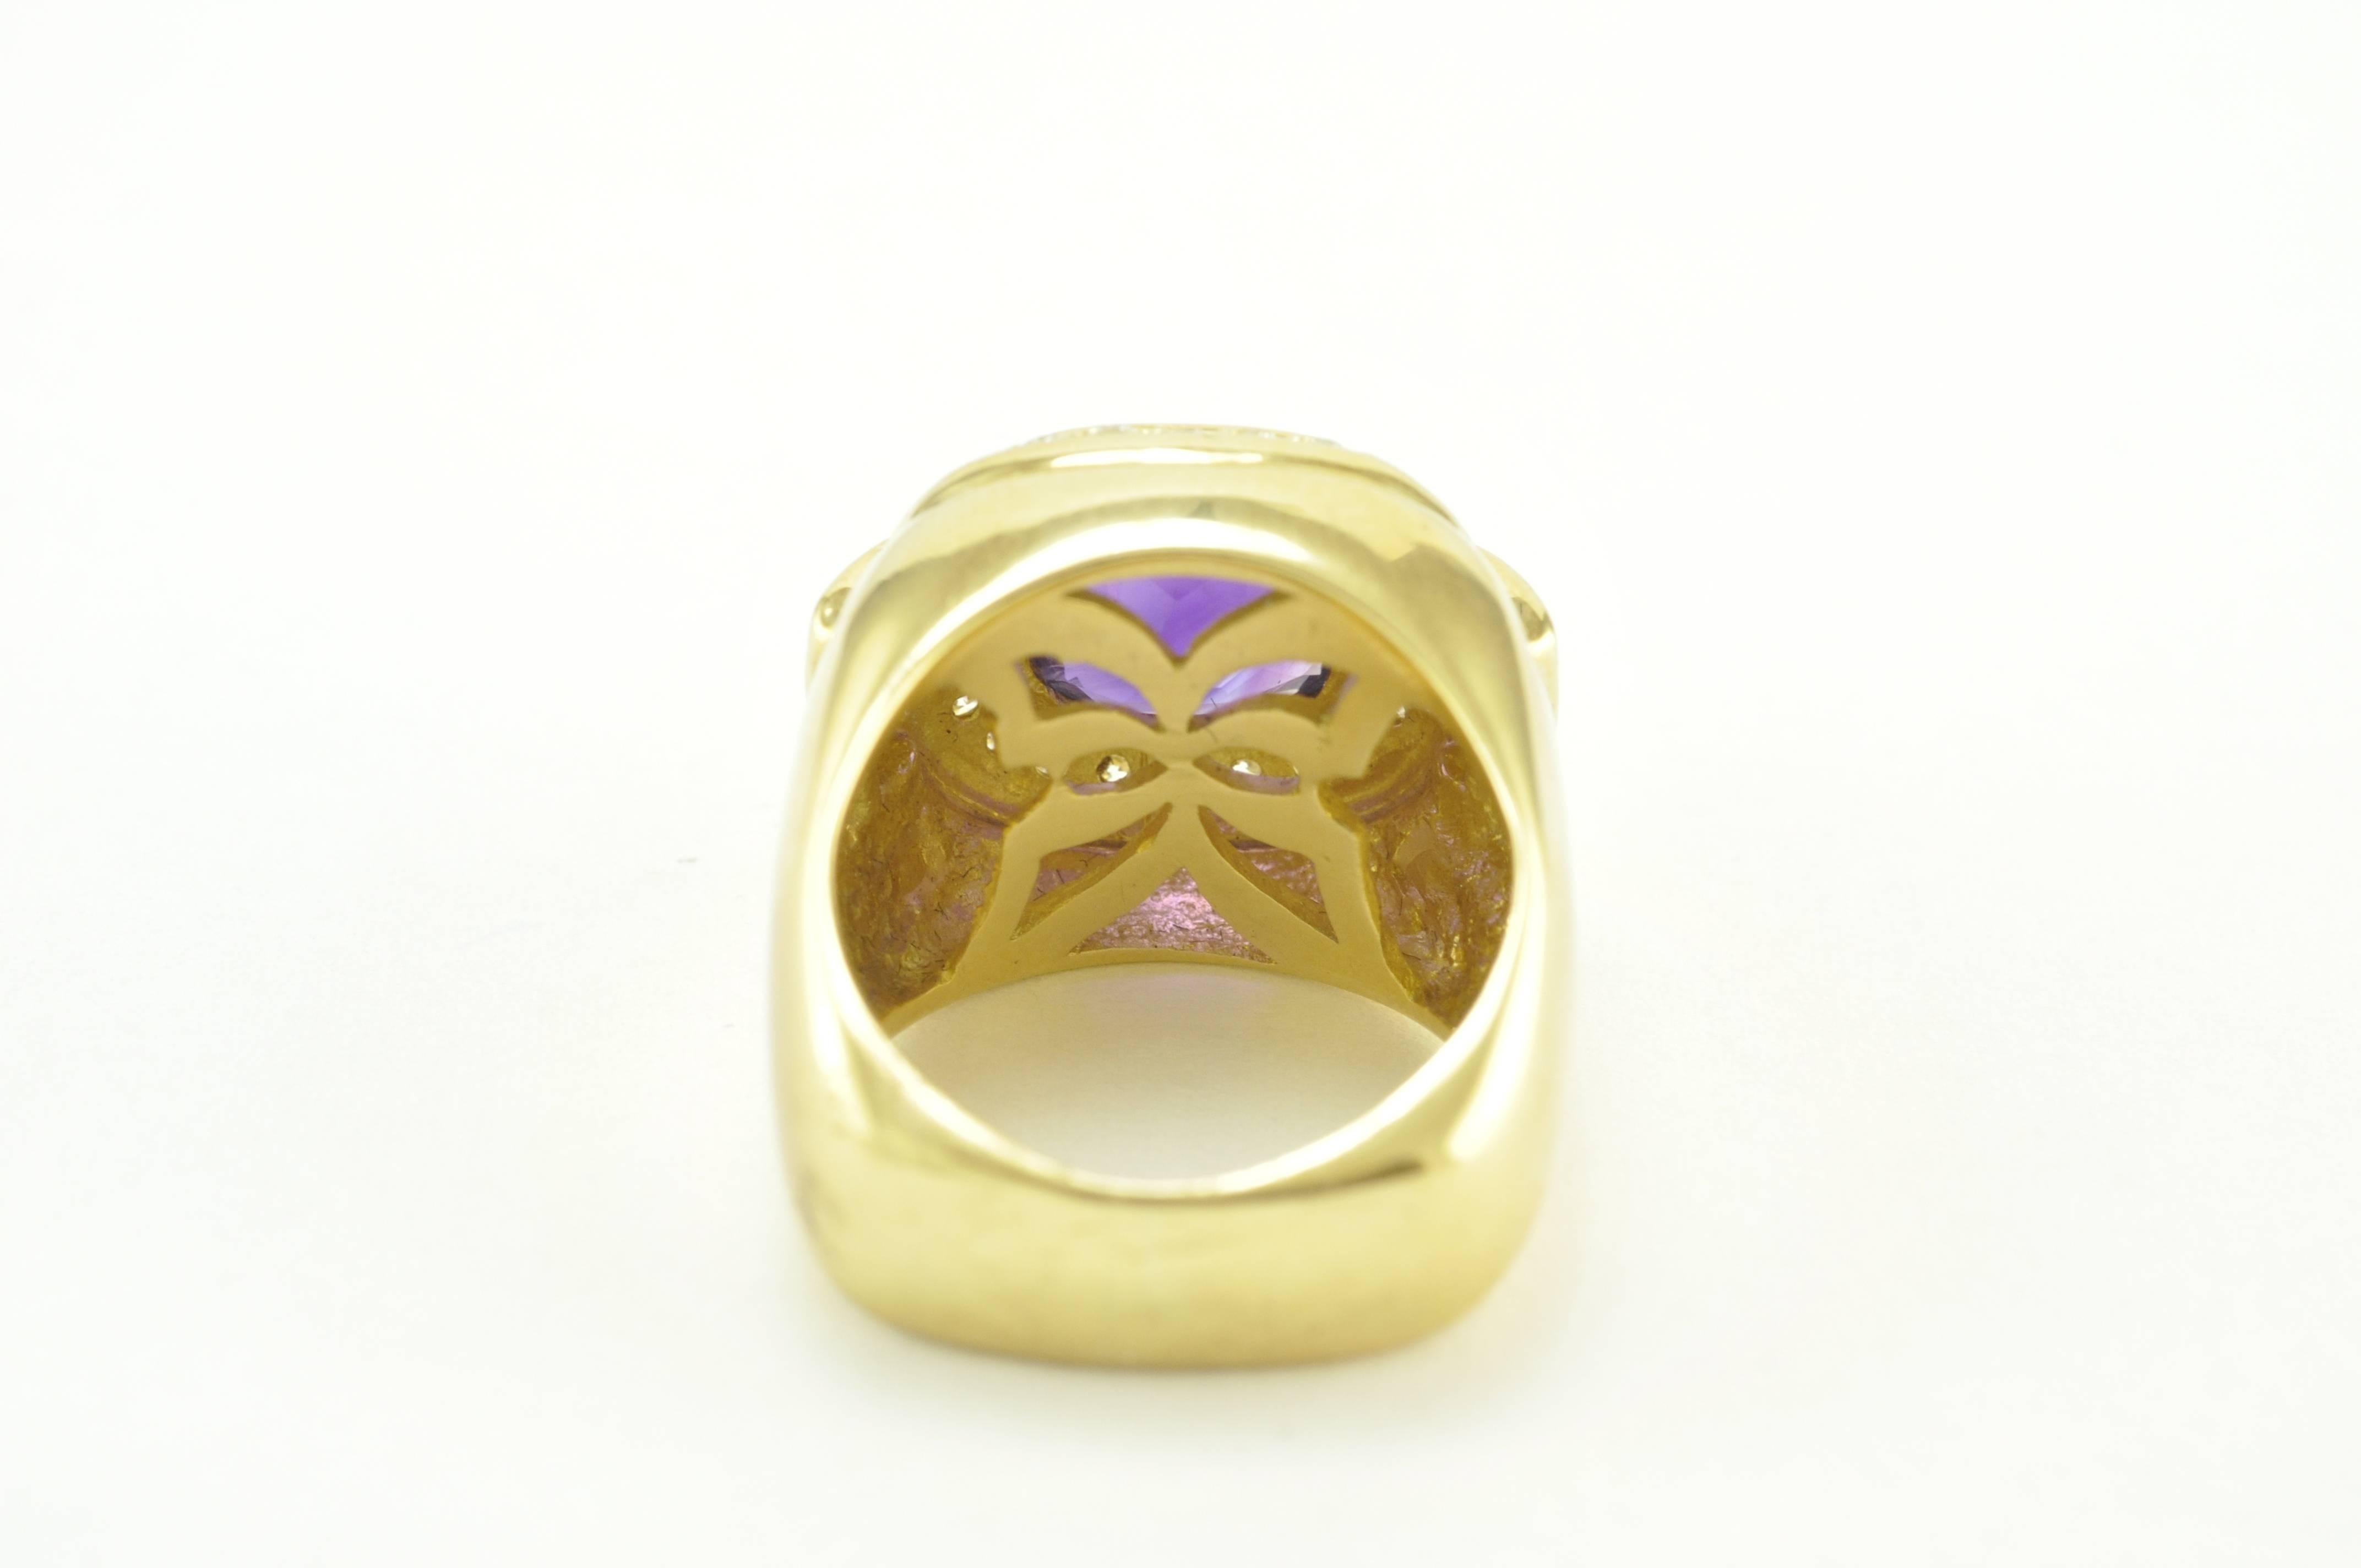 Estate 18K Faceted Amethyst Ring with 1.2 CT TDW.  Condition Consistent with Wear.  Size 7 but can be sized to fit.  